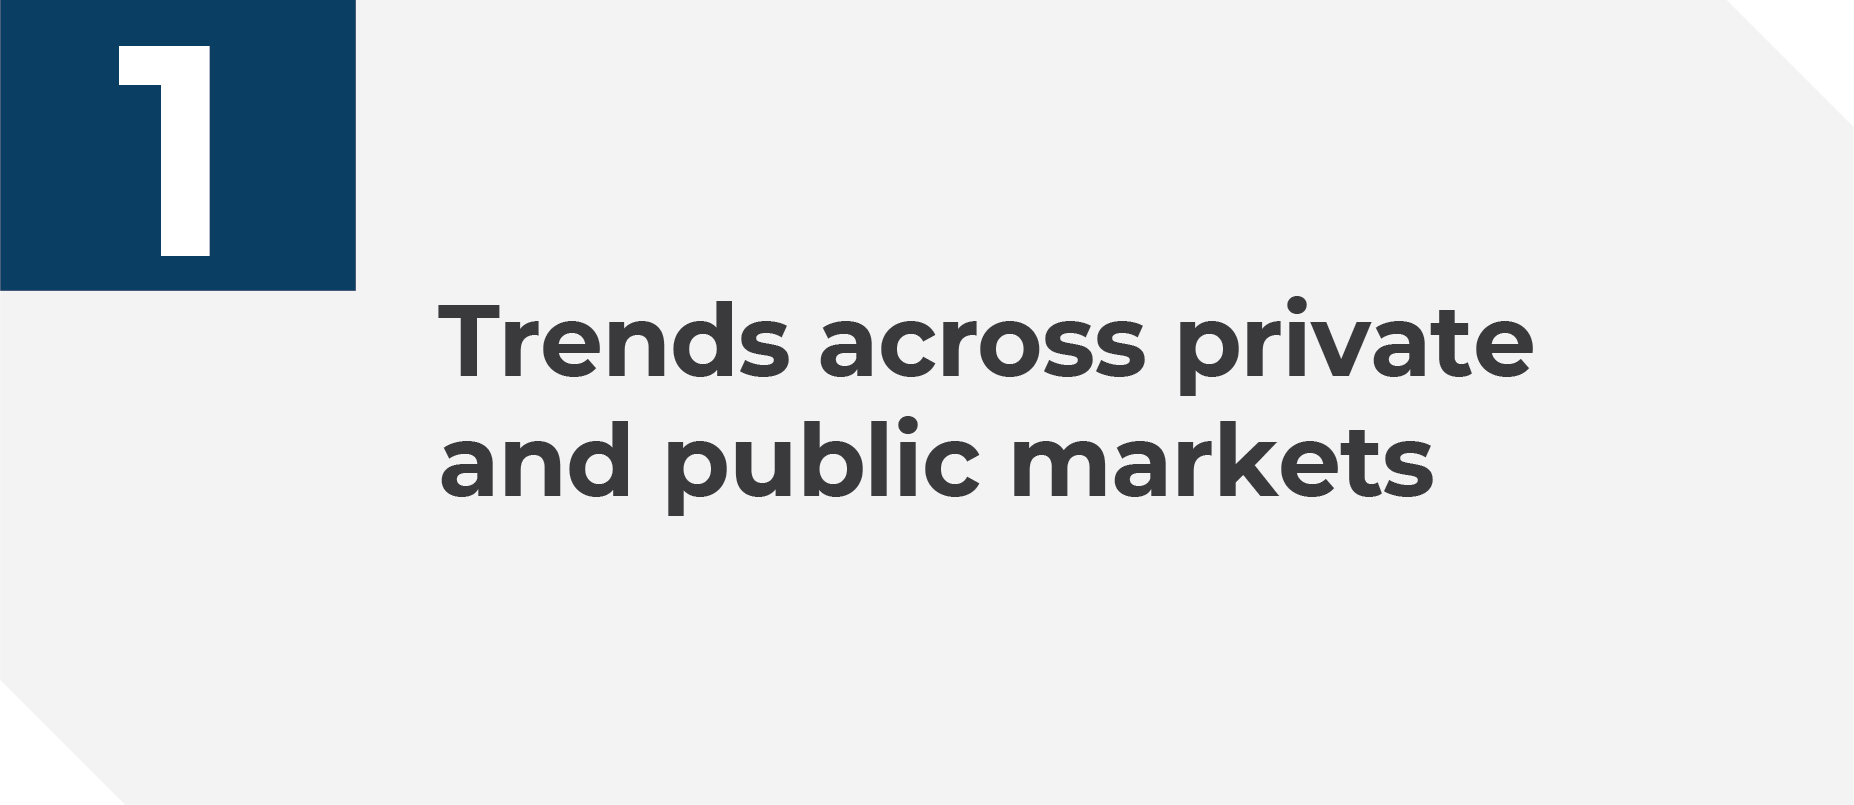 Trends across private and public markets